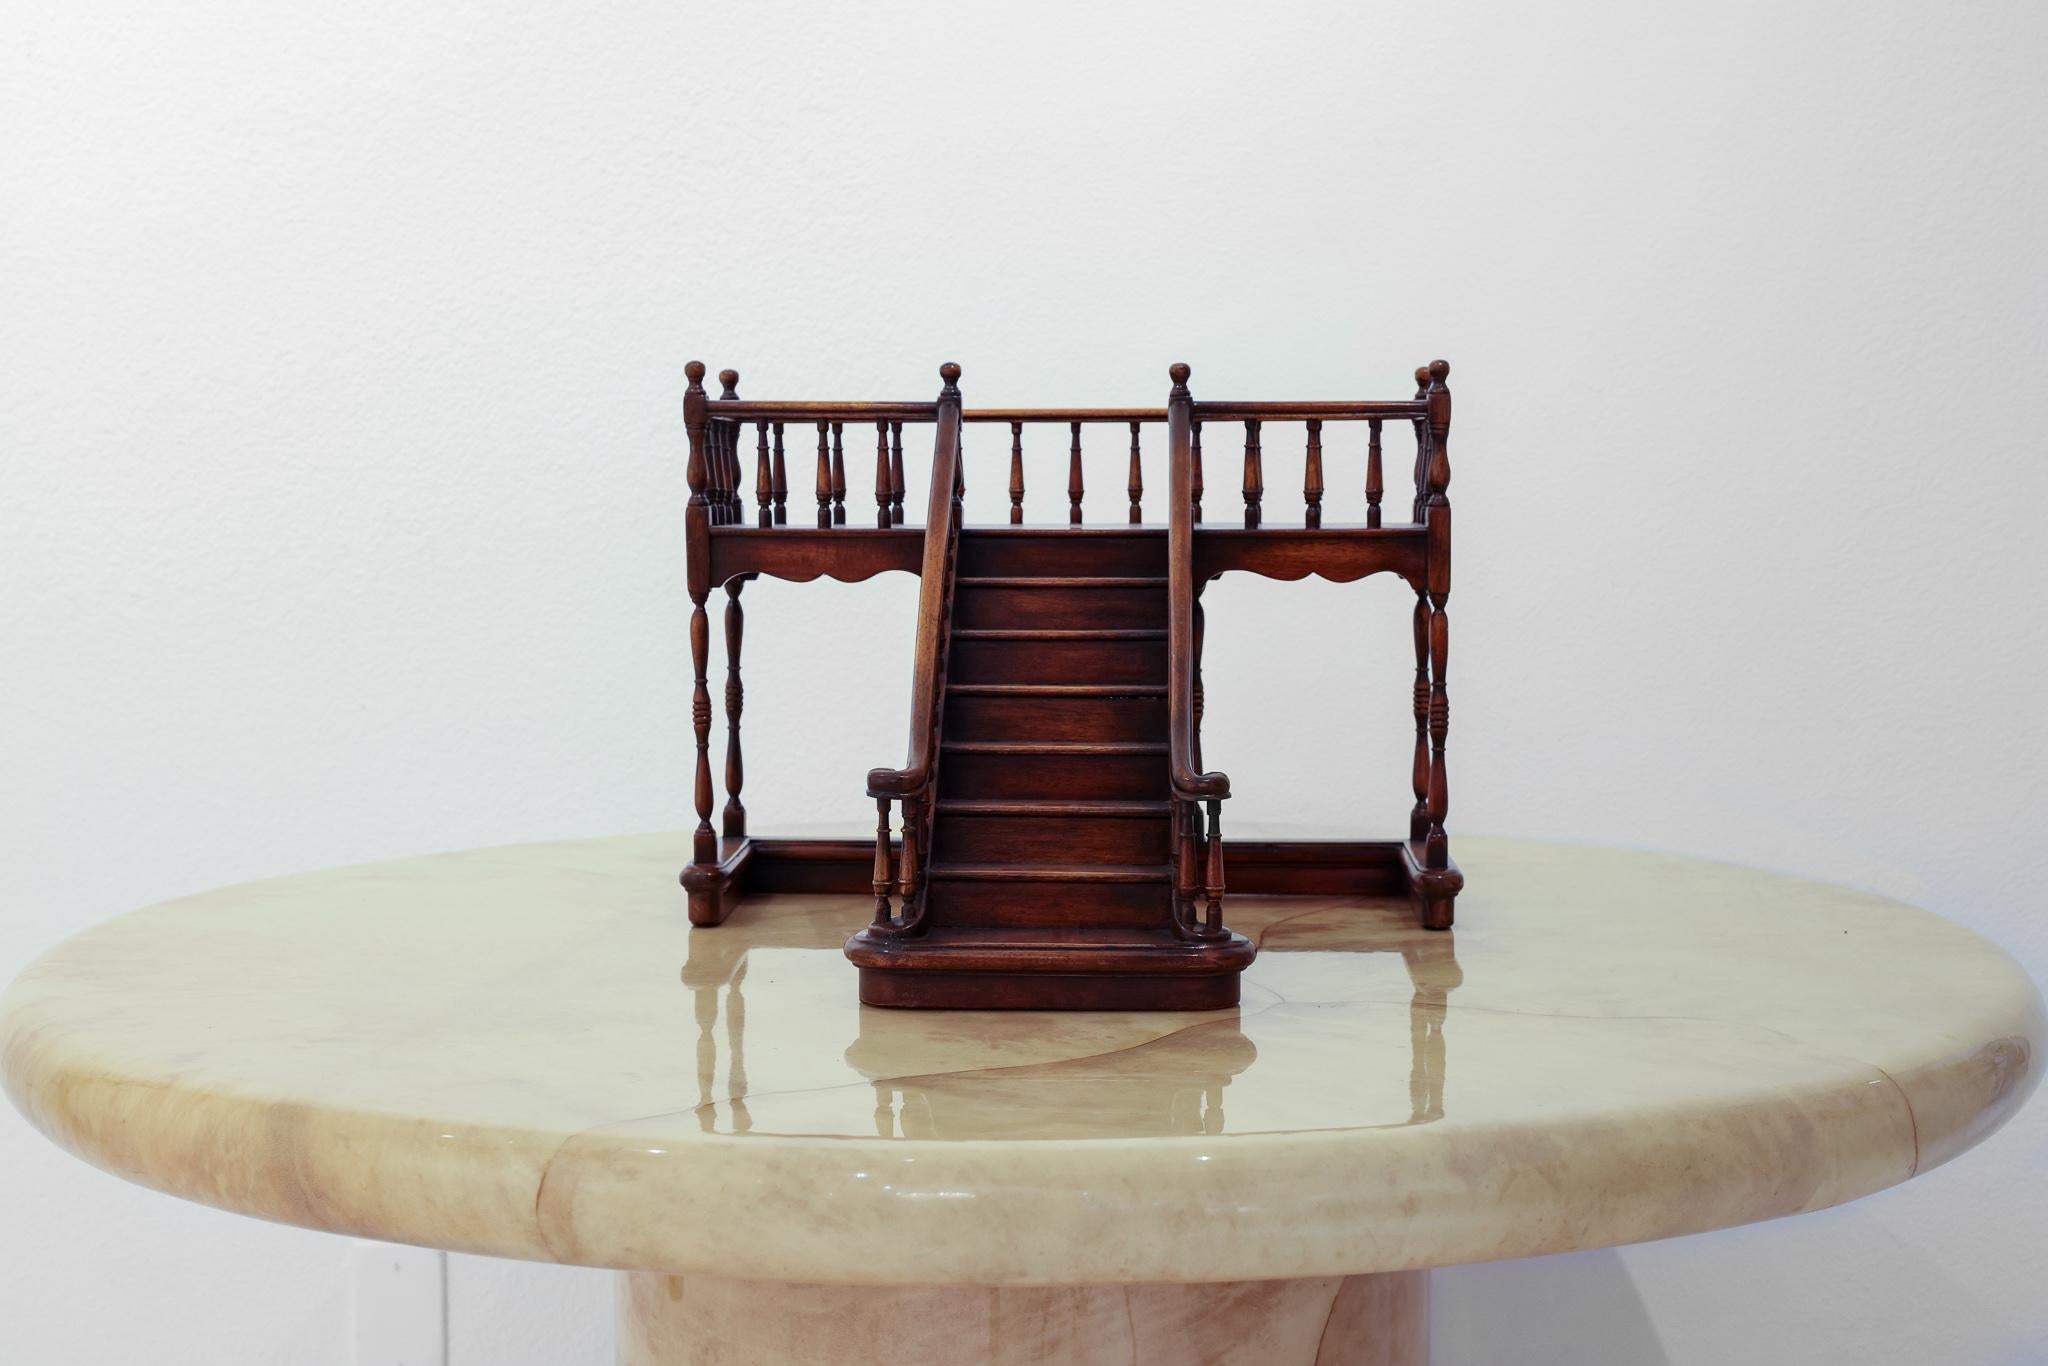 This is wonderfully carved mahogany staircase. It is an 8 step staircase with fine turned wood vertical landing and banister supports, ball barrel posts, a landing and a supportive squared off U shaped base. These architectural staircases have been